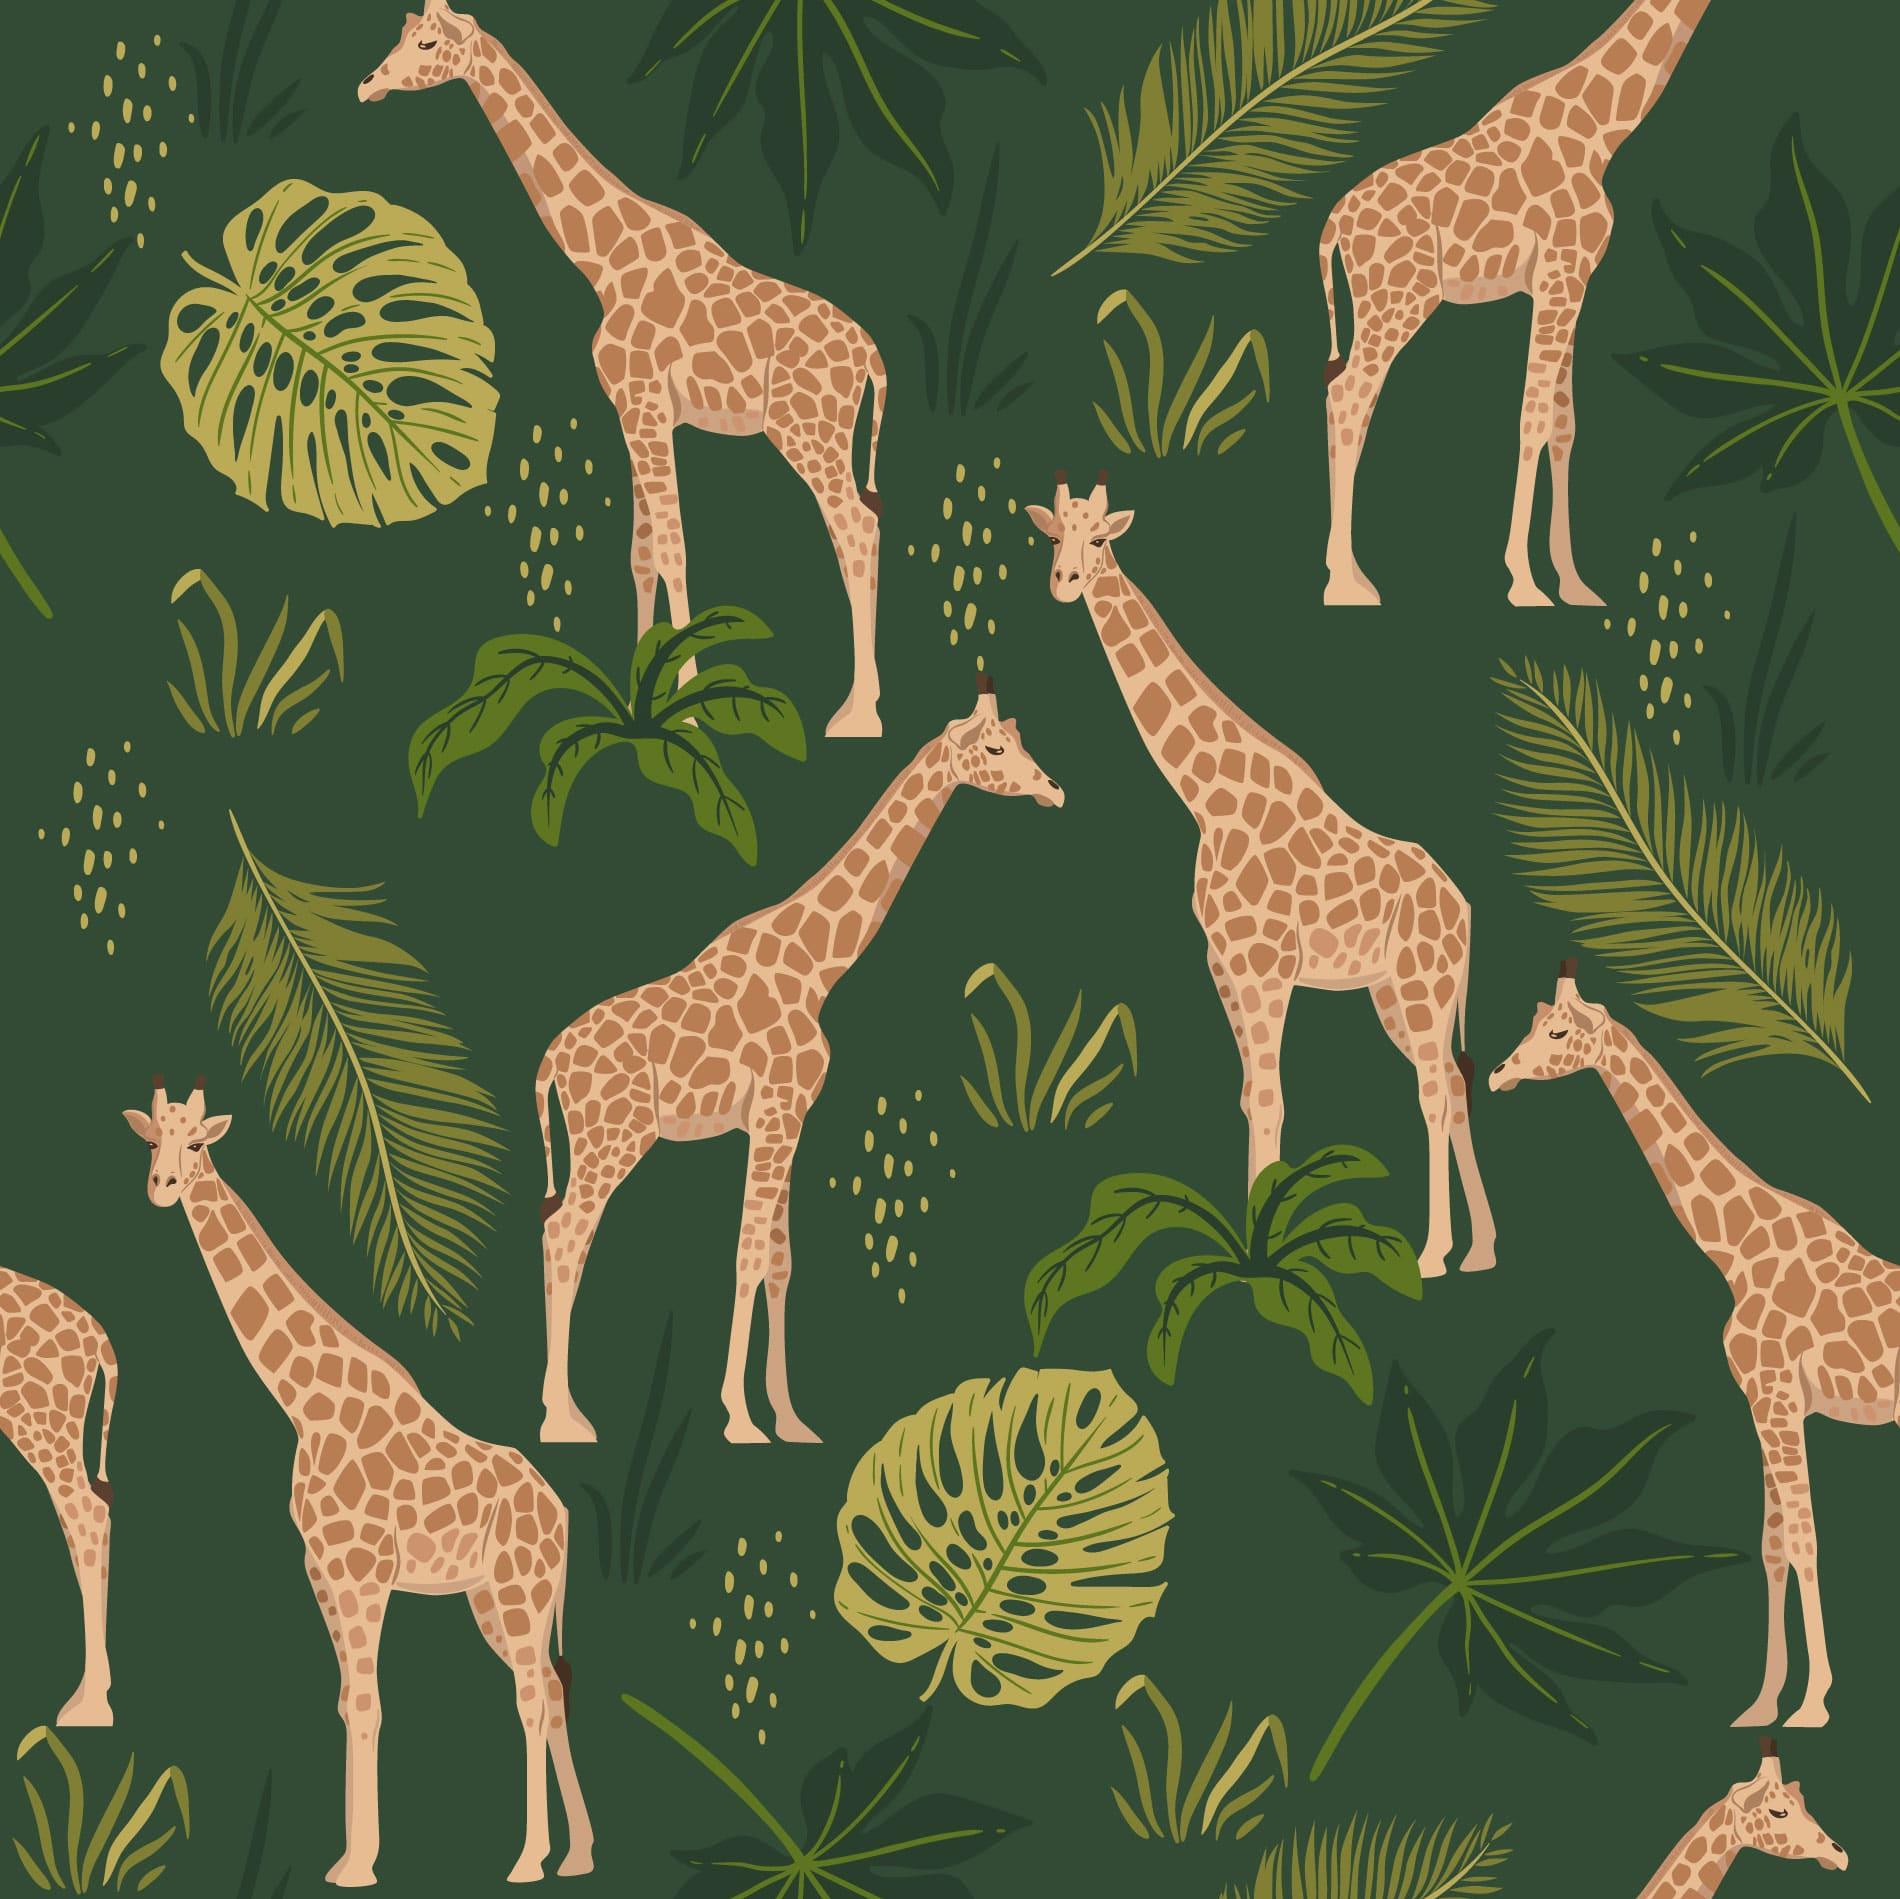 Giraffe Wallpaper Peel And Stick Or Non Pasted